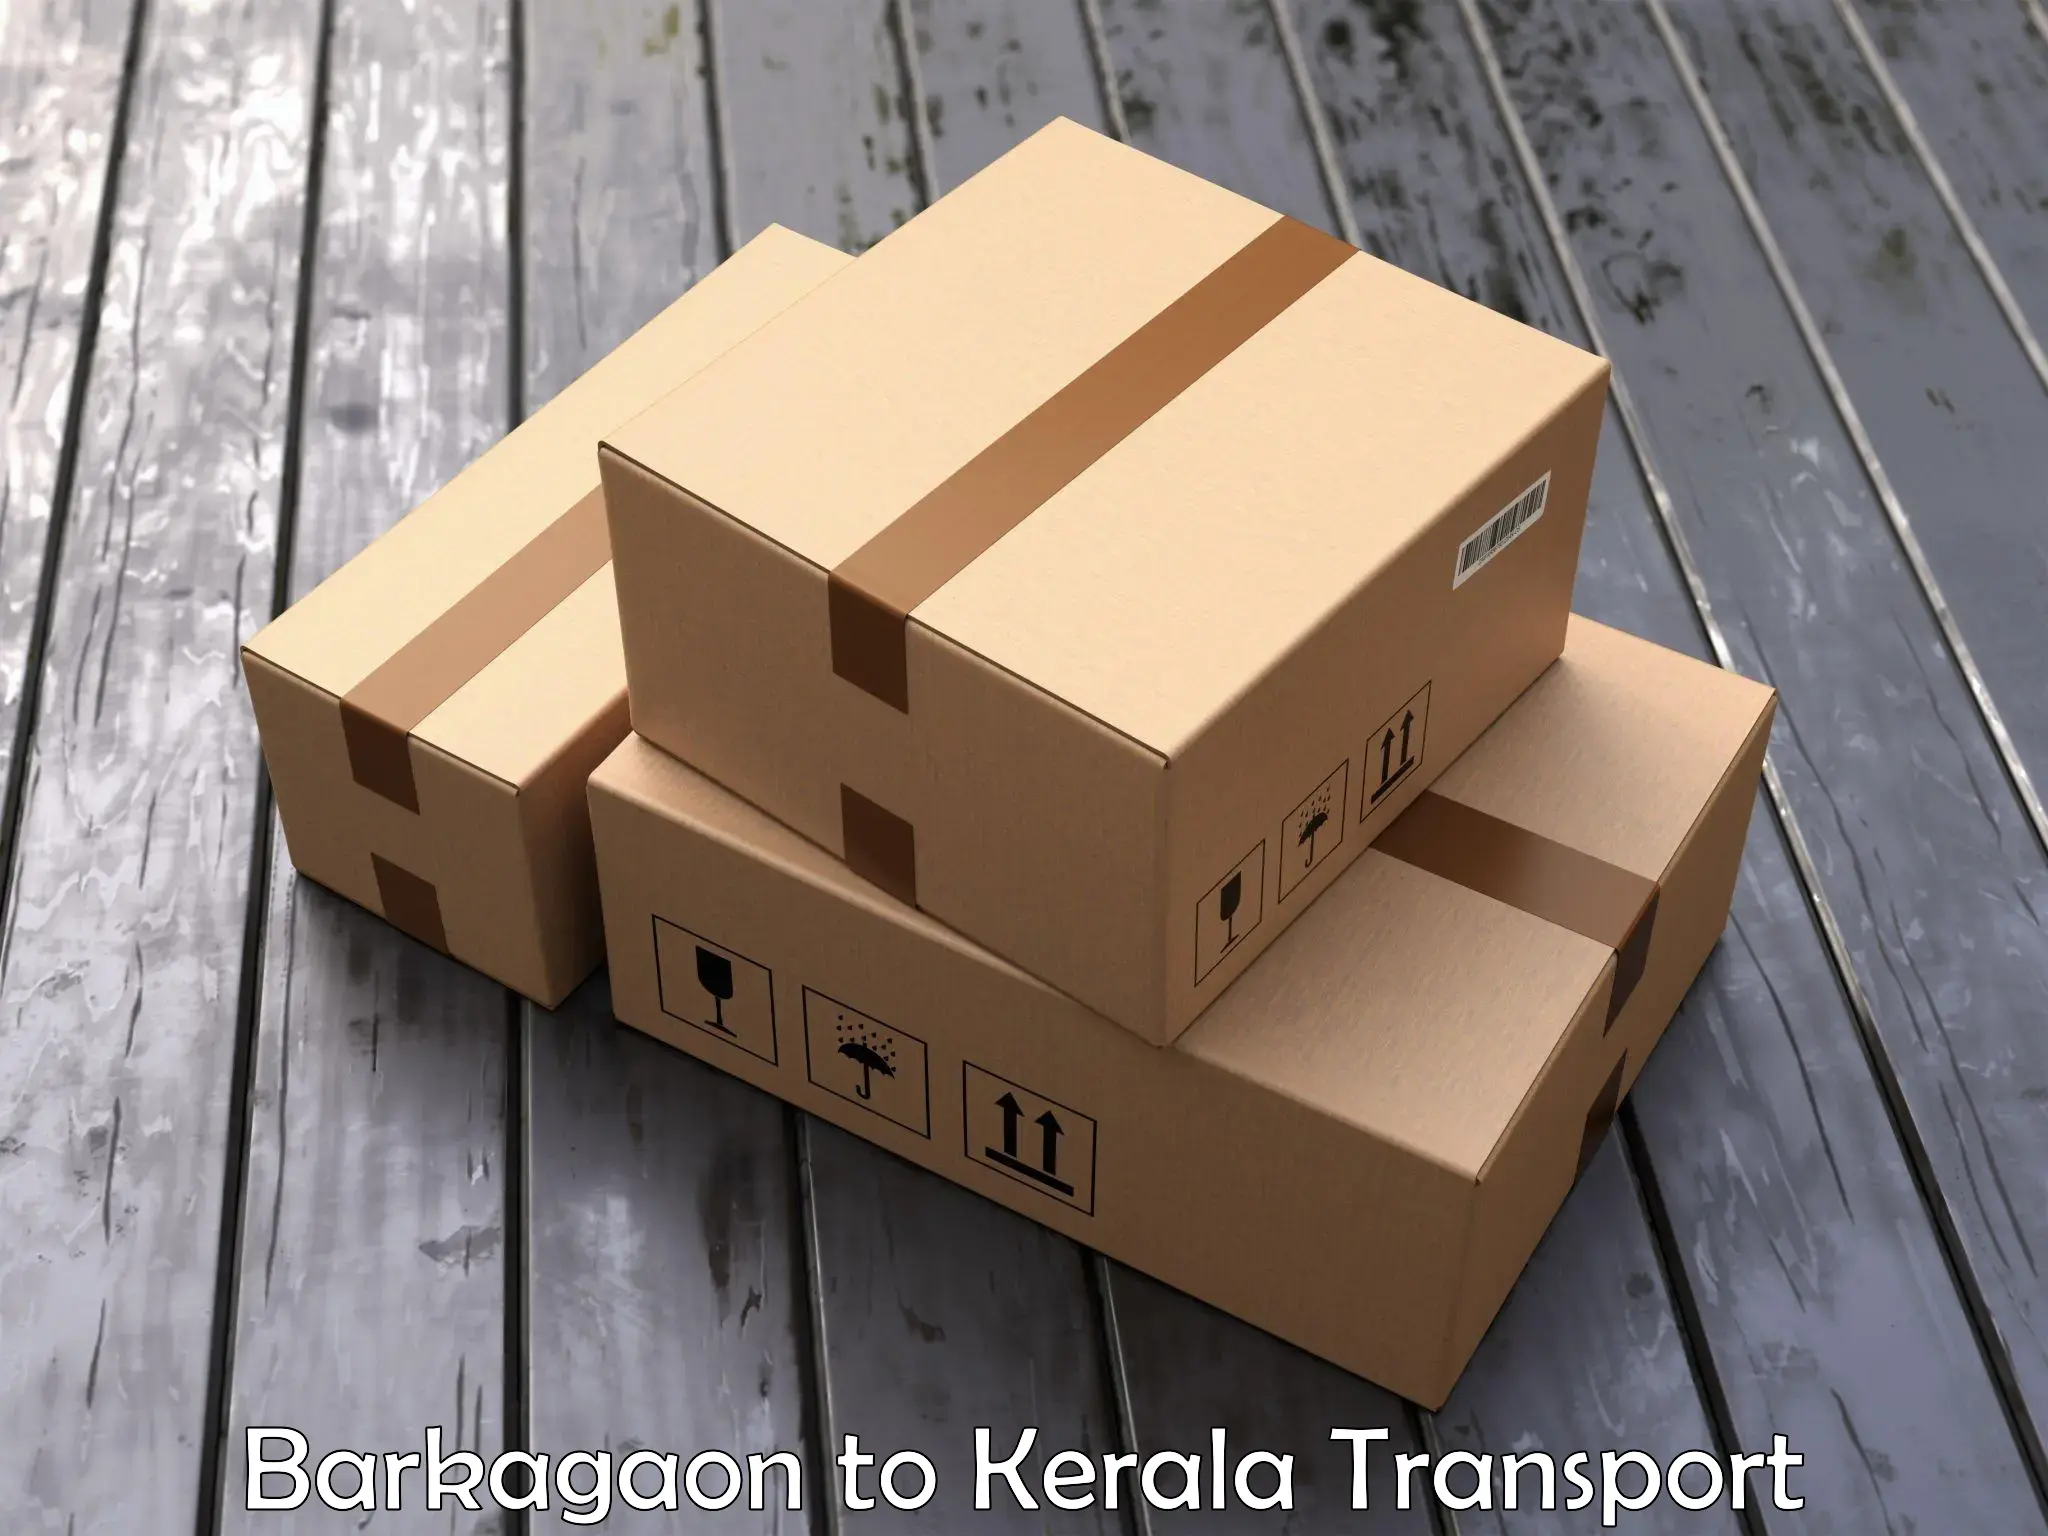 Container transport service Barkagaon to Kakkur